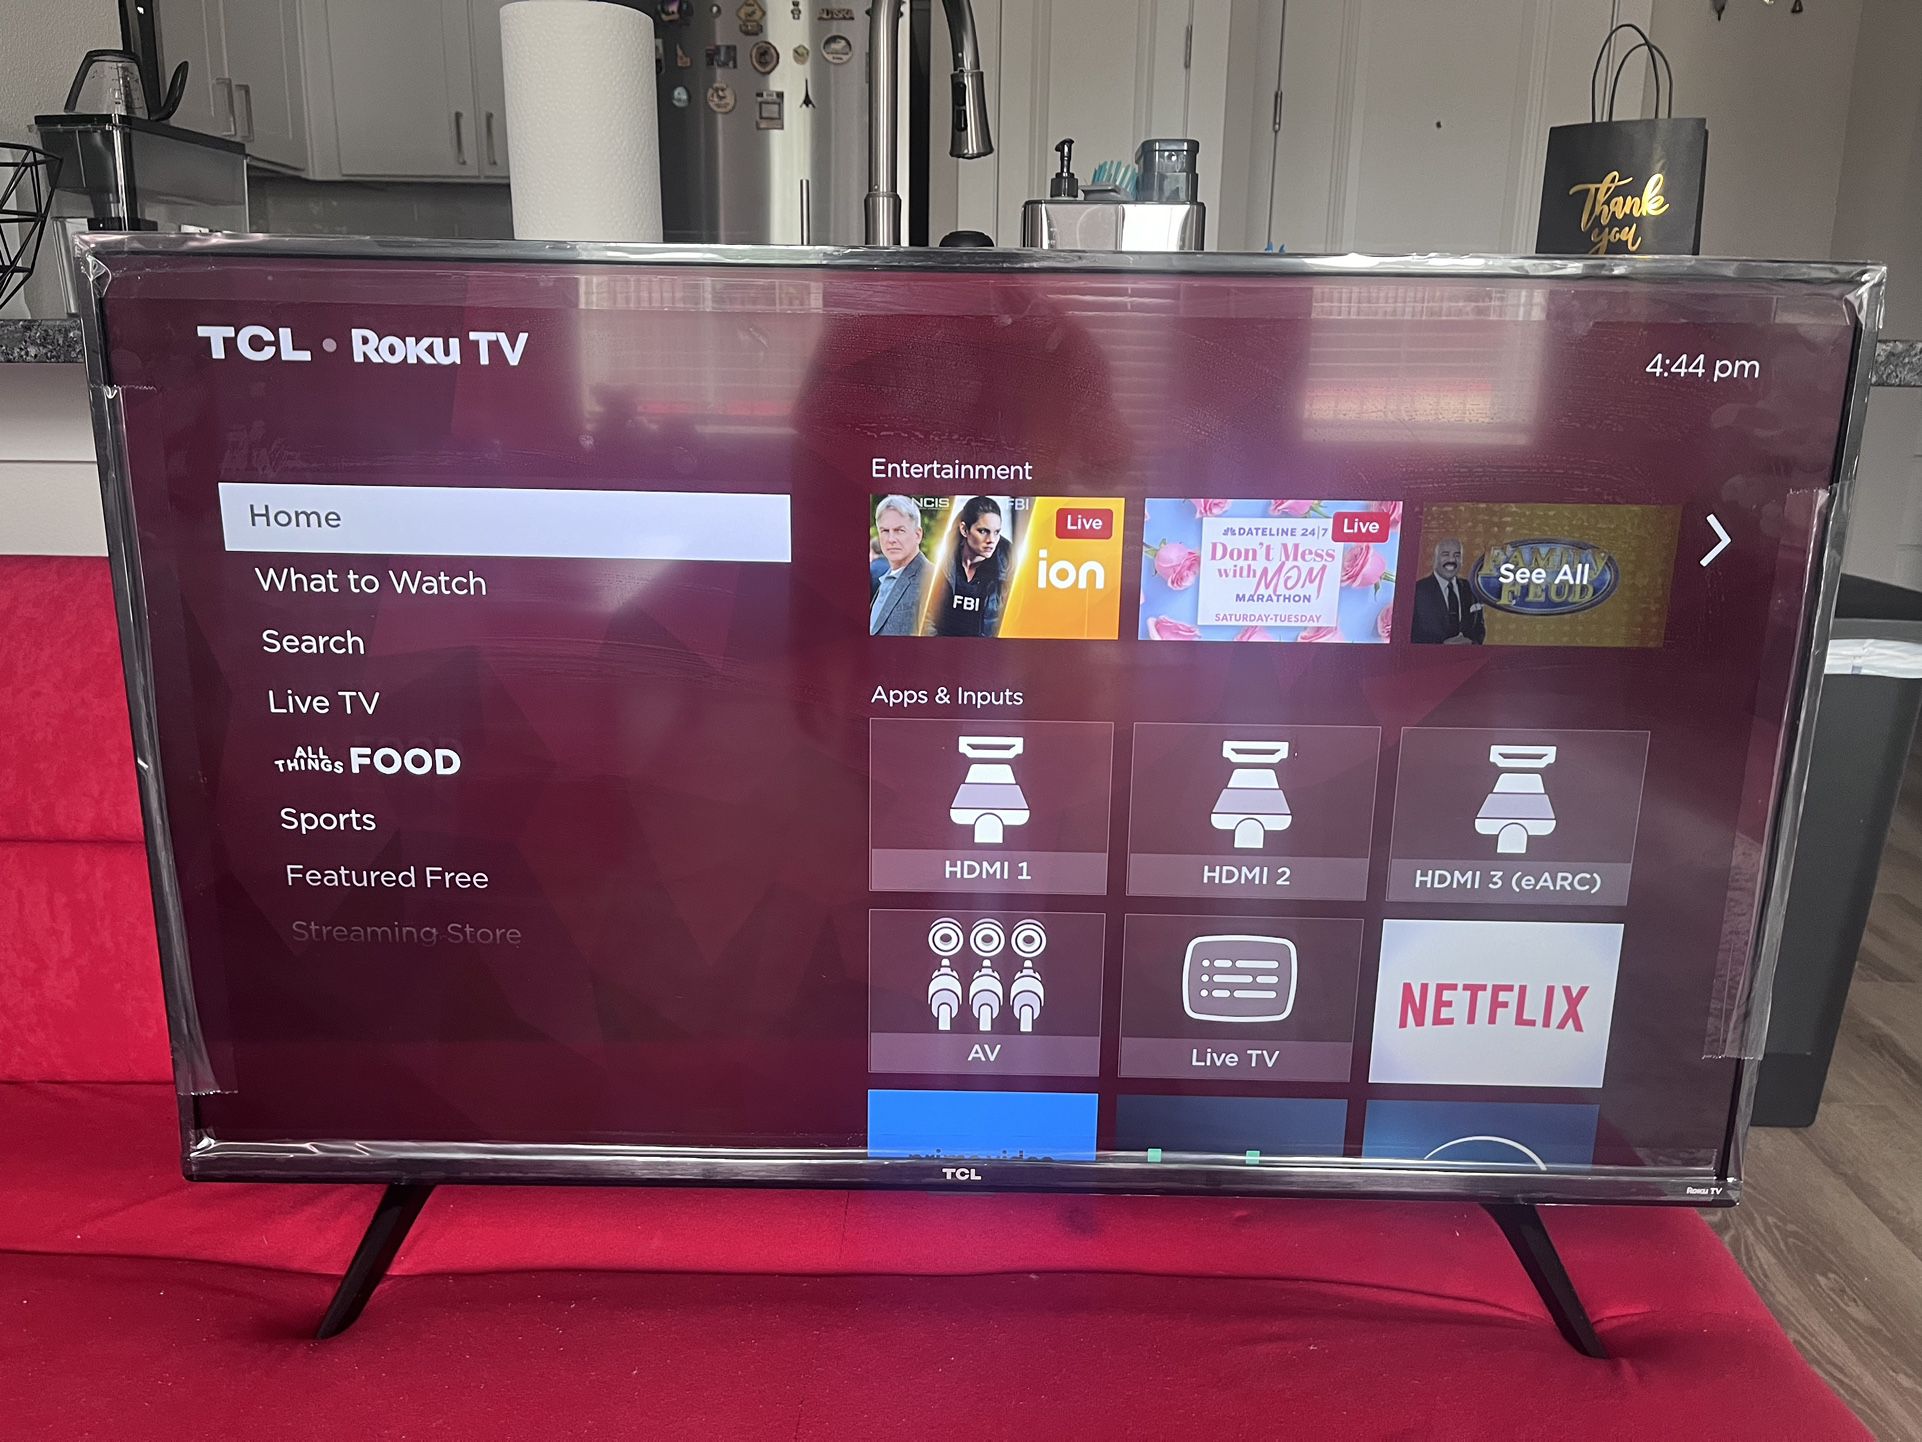 43” TV For Selling.